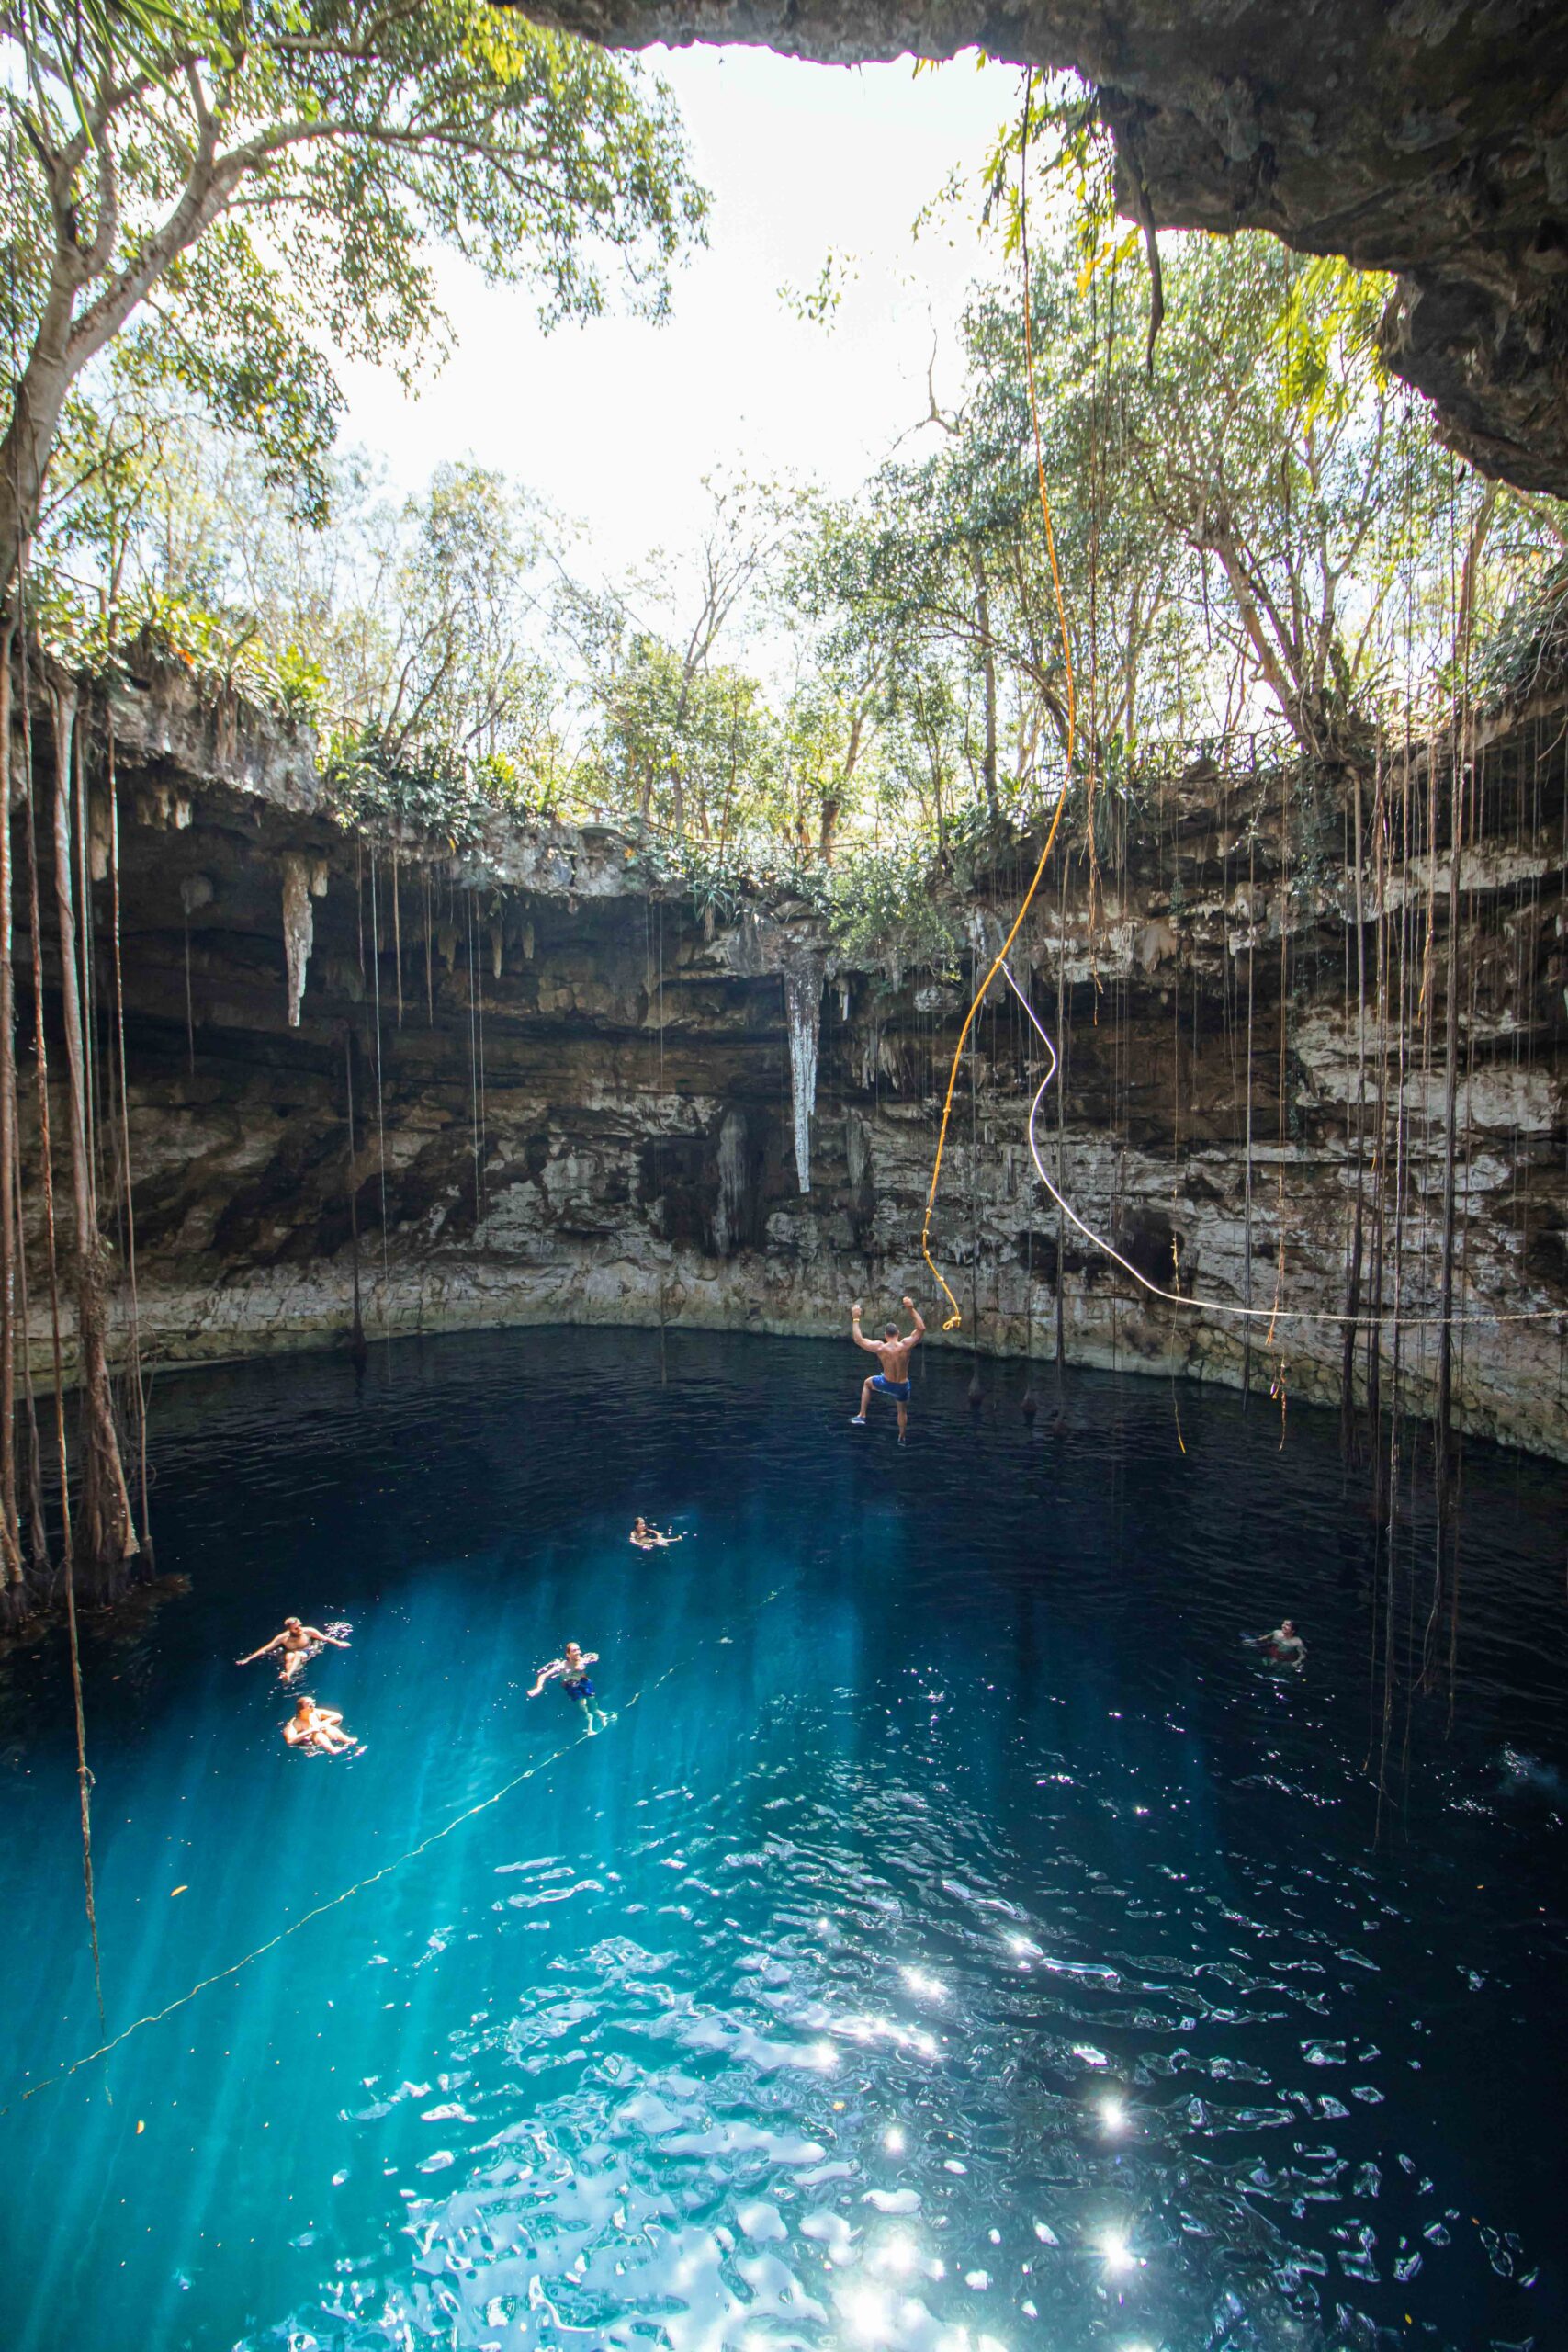 Crystal-clear cenote in Tulum, Mexico, an affordable warm winter escape for students looking for adventure.